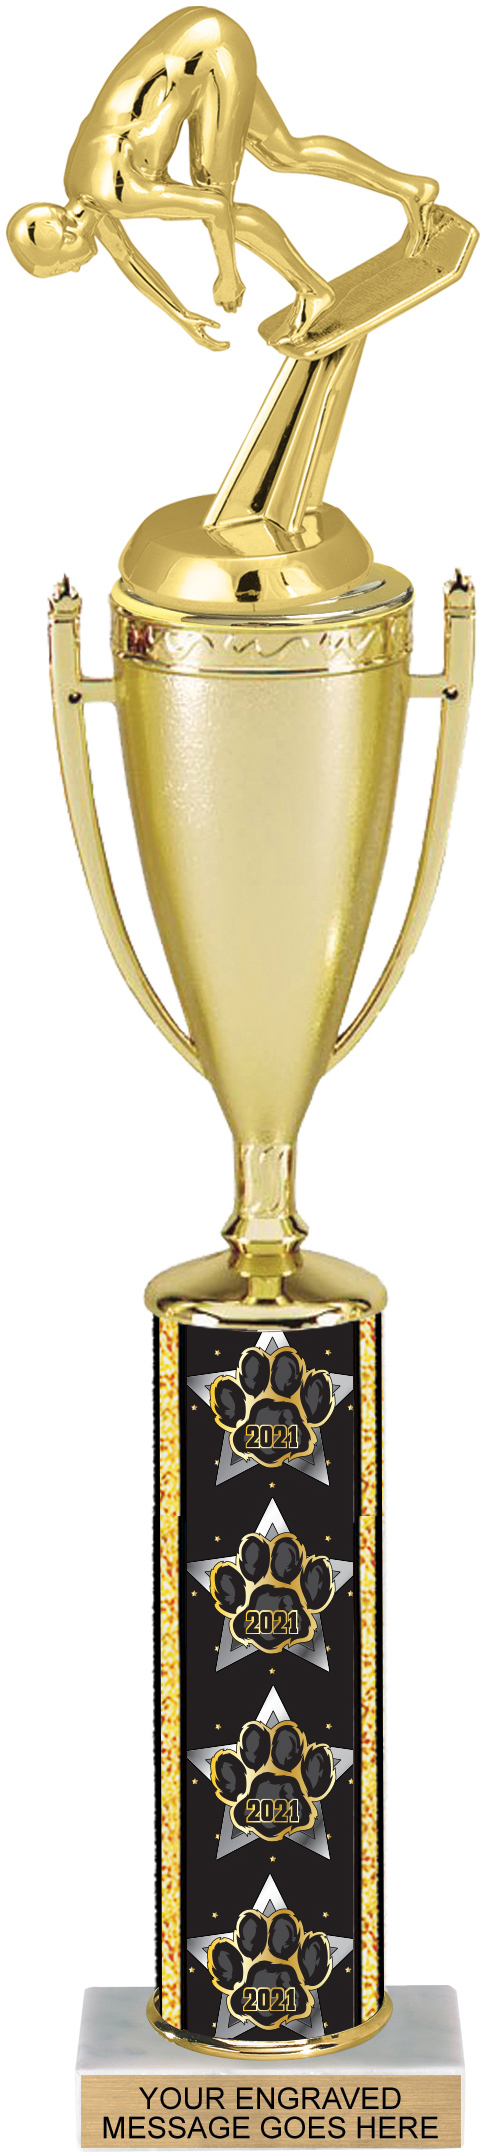 Cup Trophy with Year Paw Column - 17 inch